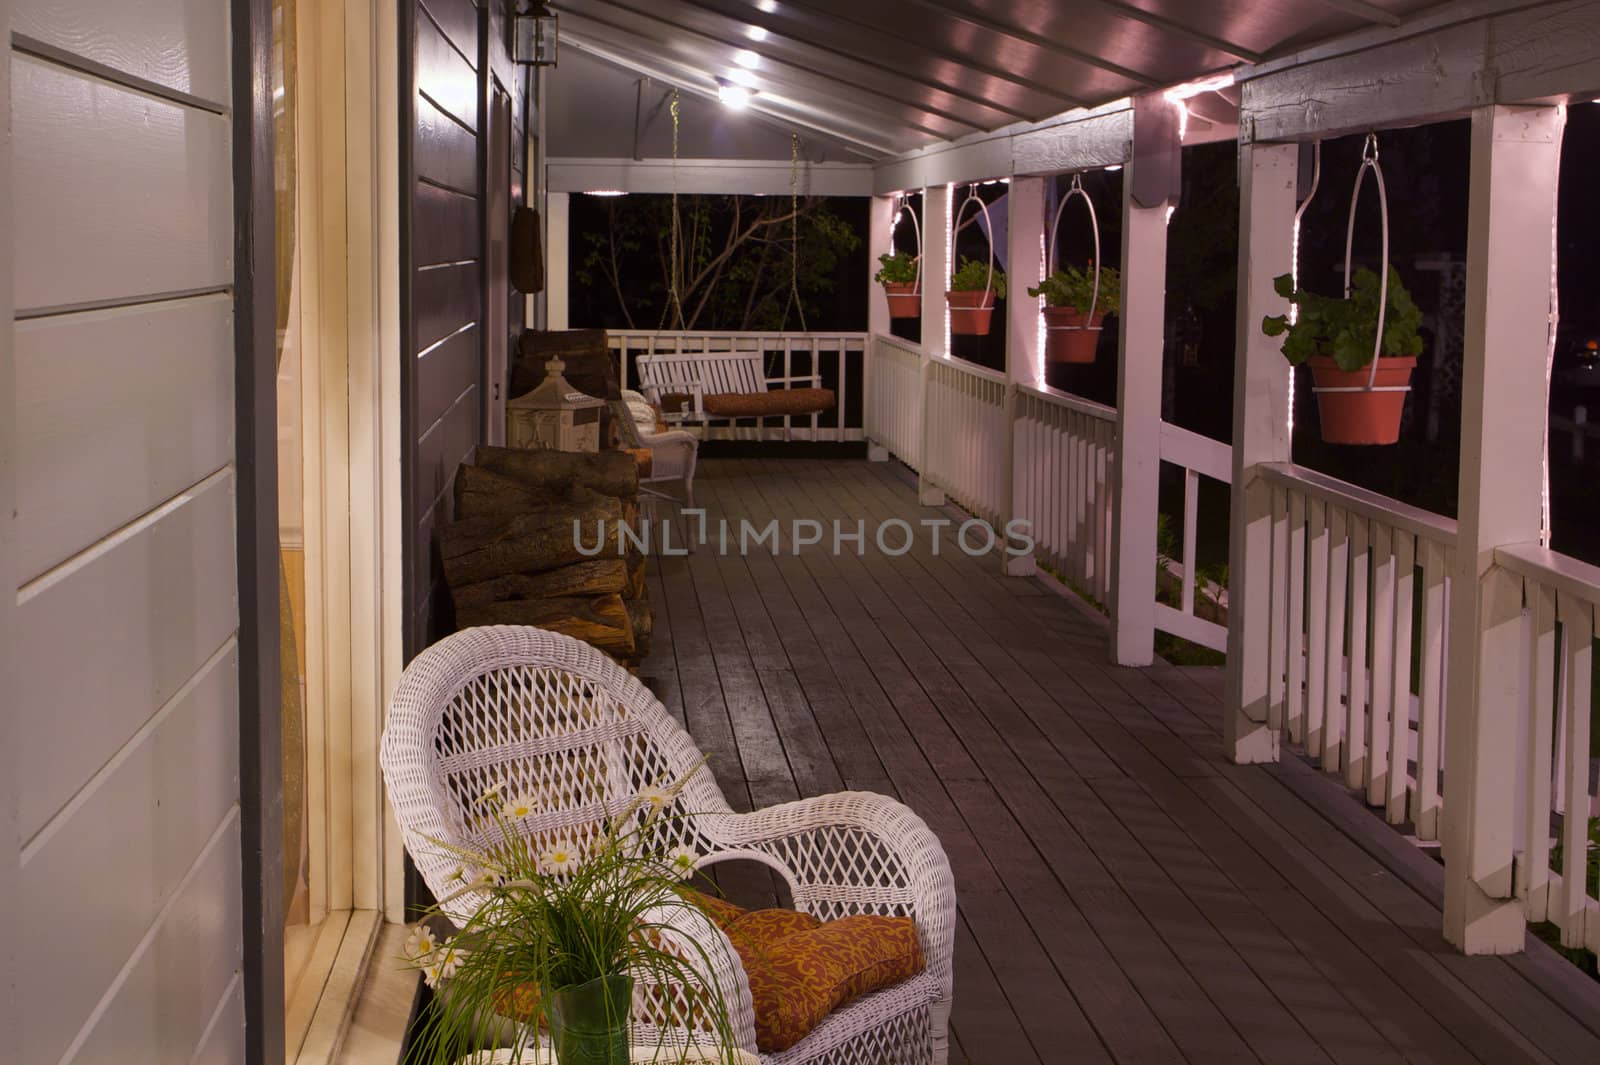 Image of front porch on a country home at night horizontal